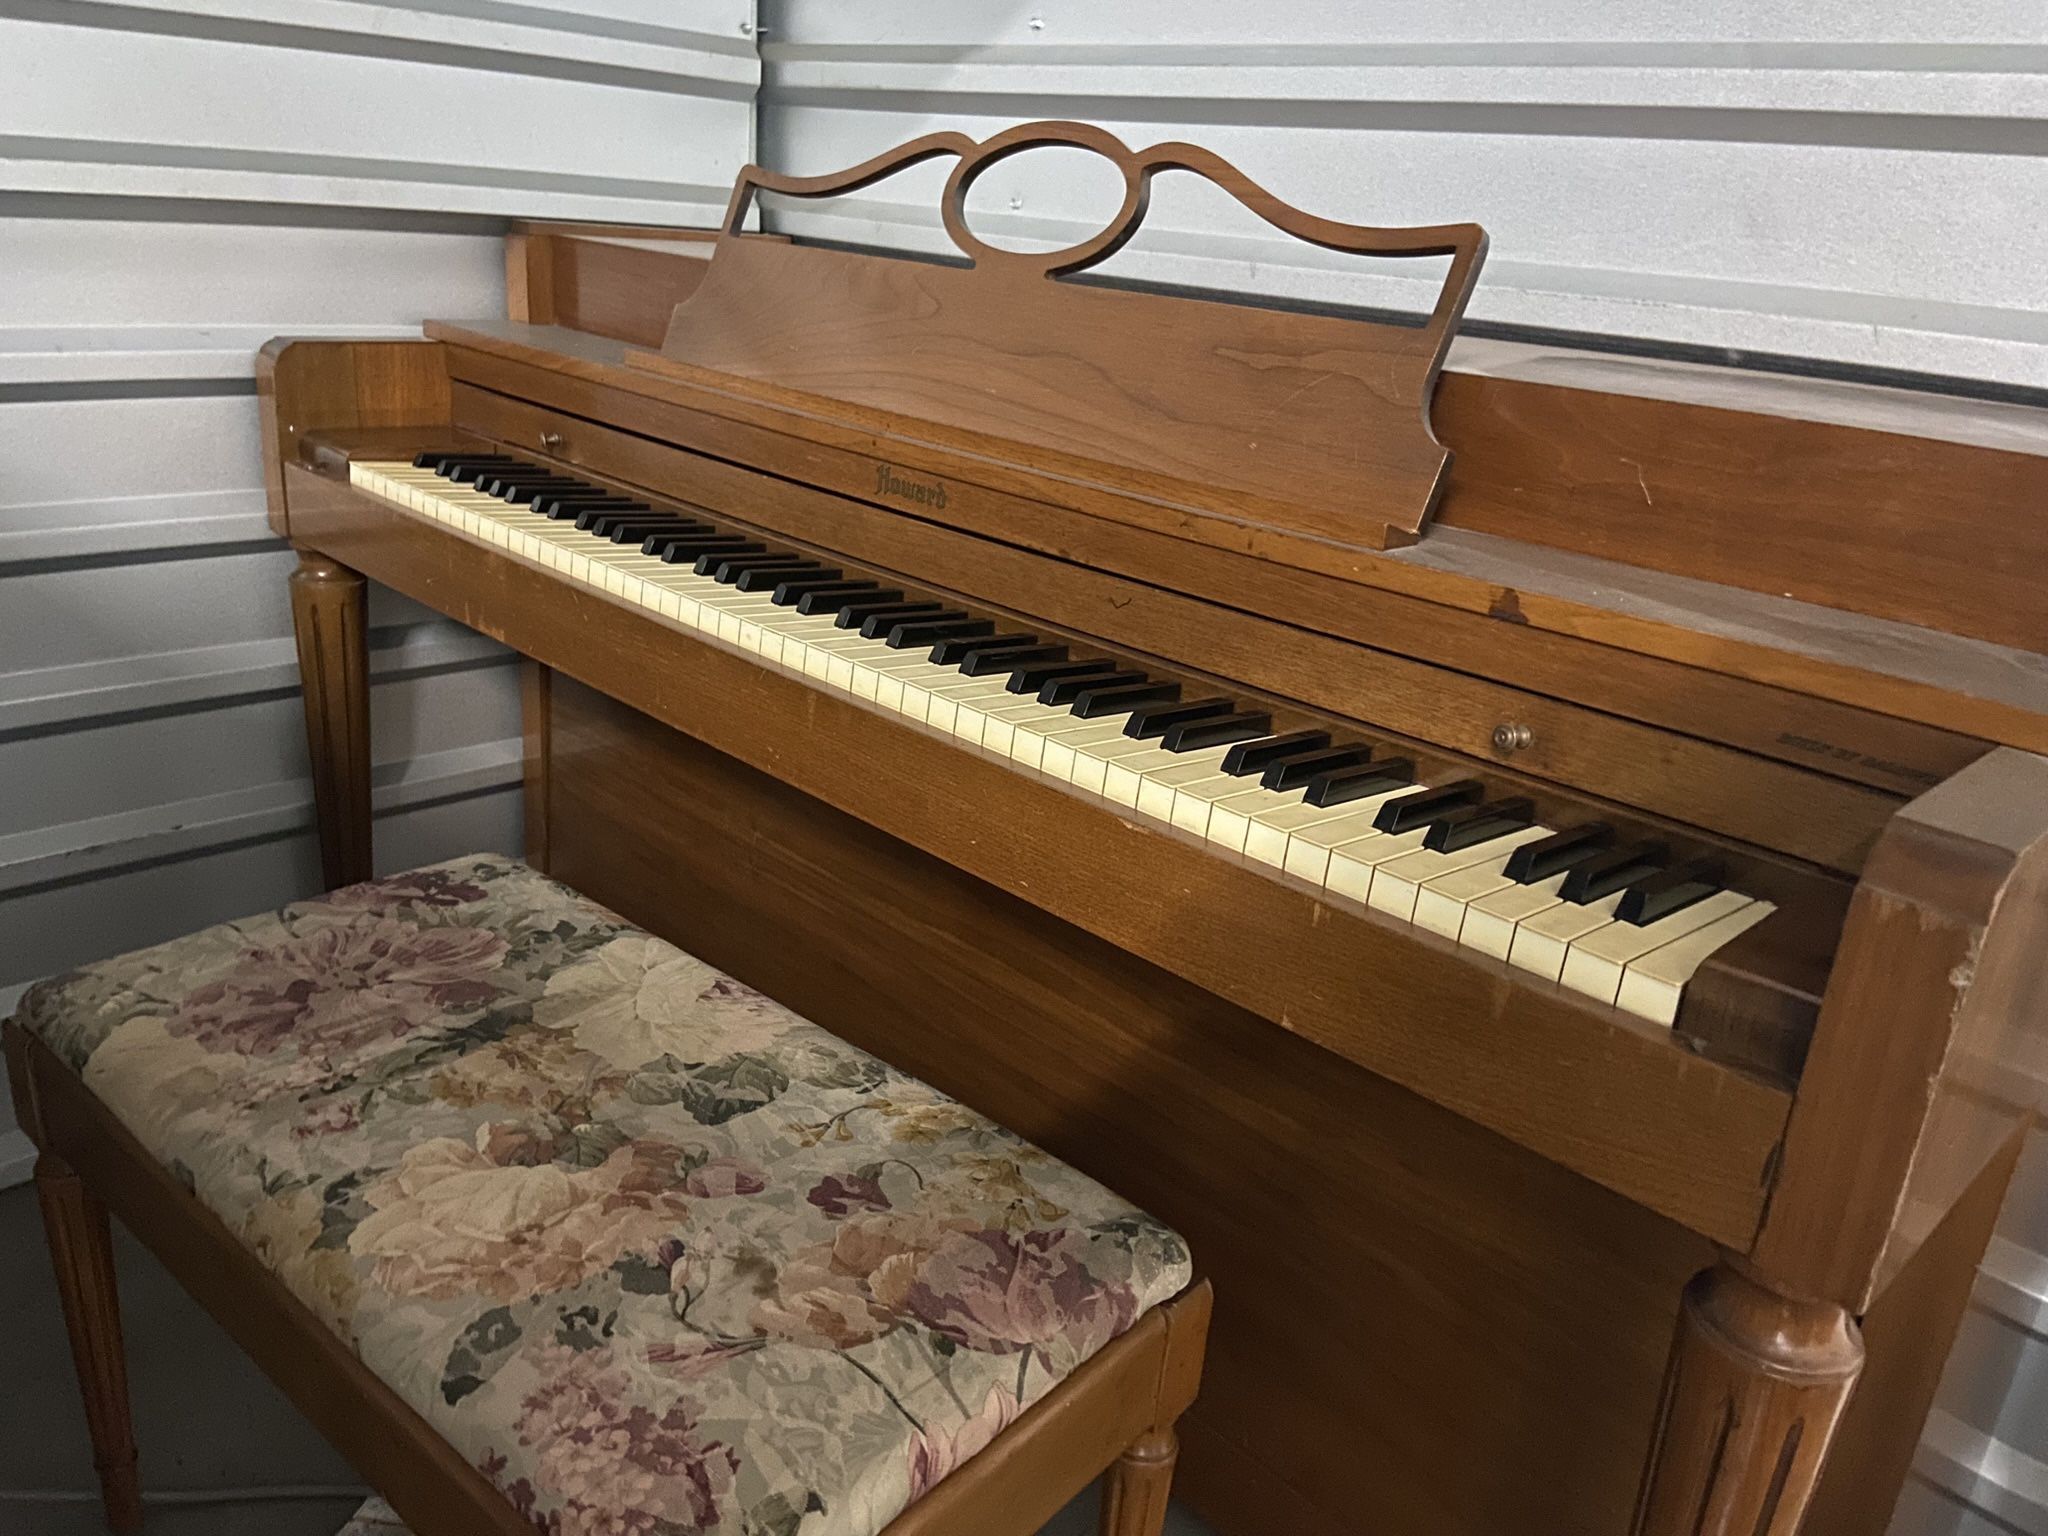 Upright Piano For Sale With Bench And Books